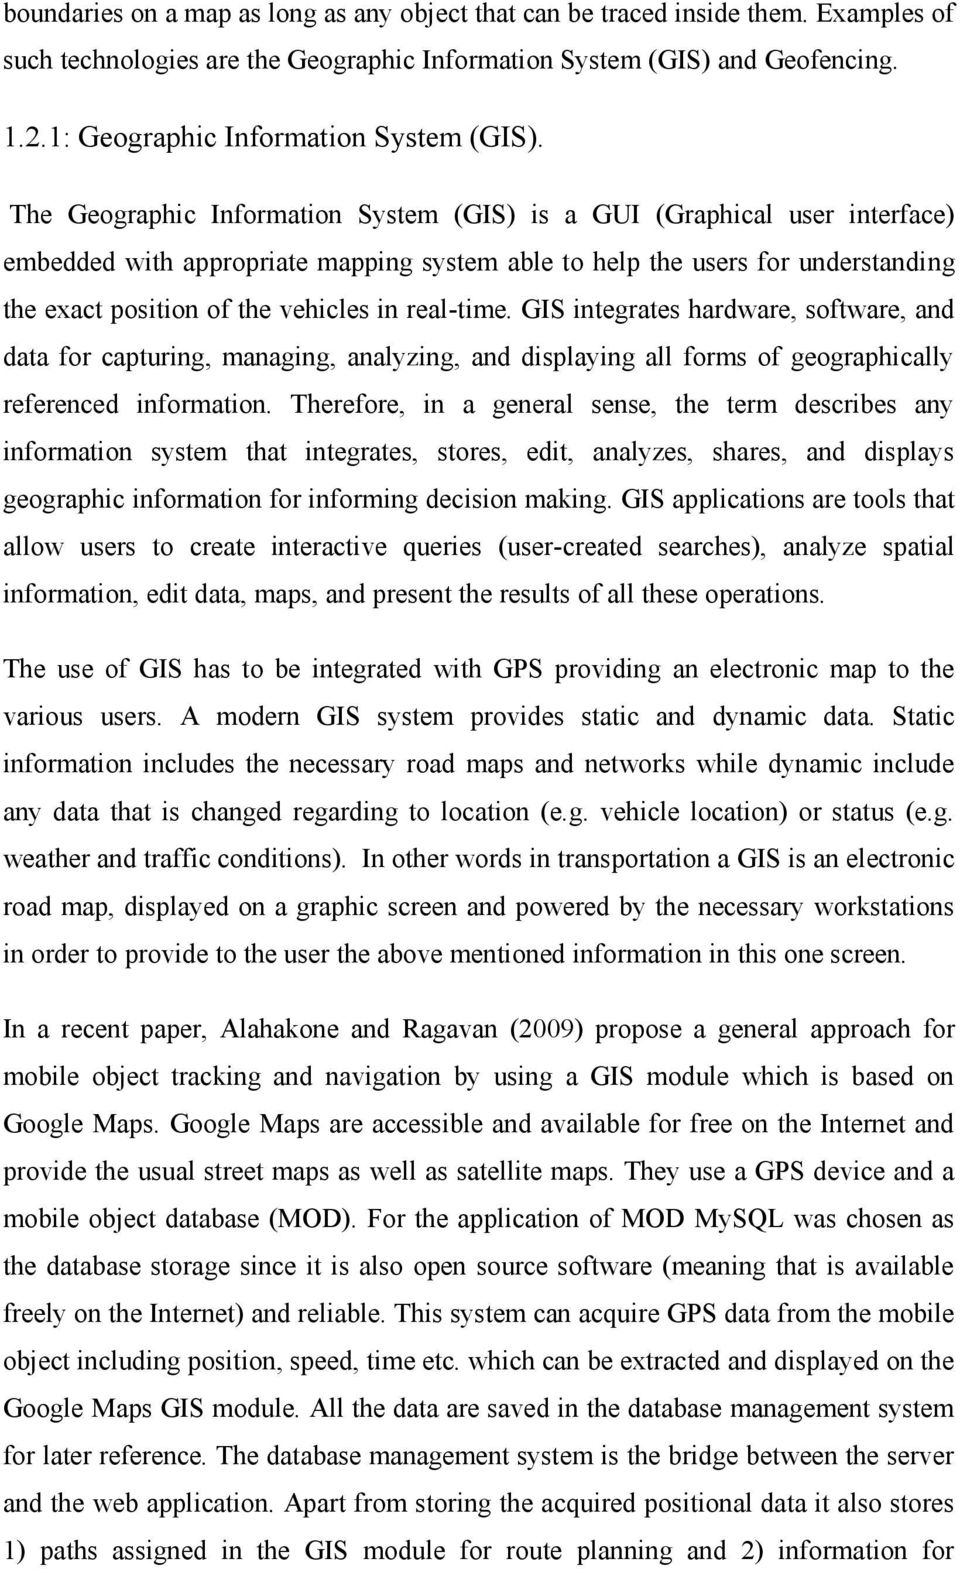 The Geographic Information System (GIS) is a GUI (Graphical user interface) embedded with appropriate mapping system able to help the users for understanding the exact position of the vehicles in